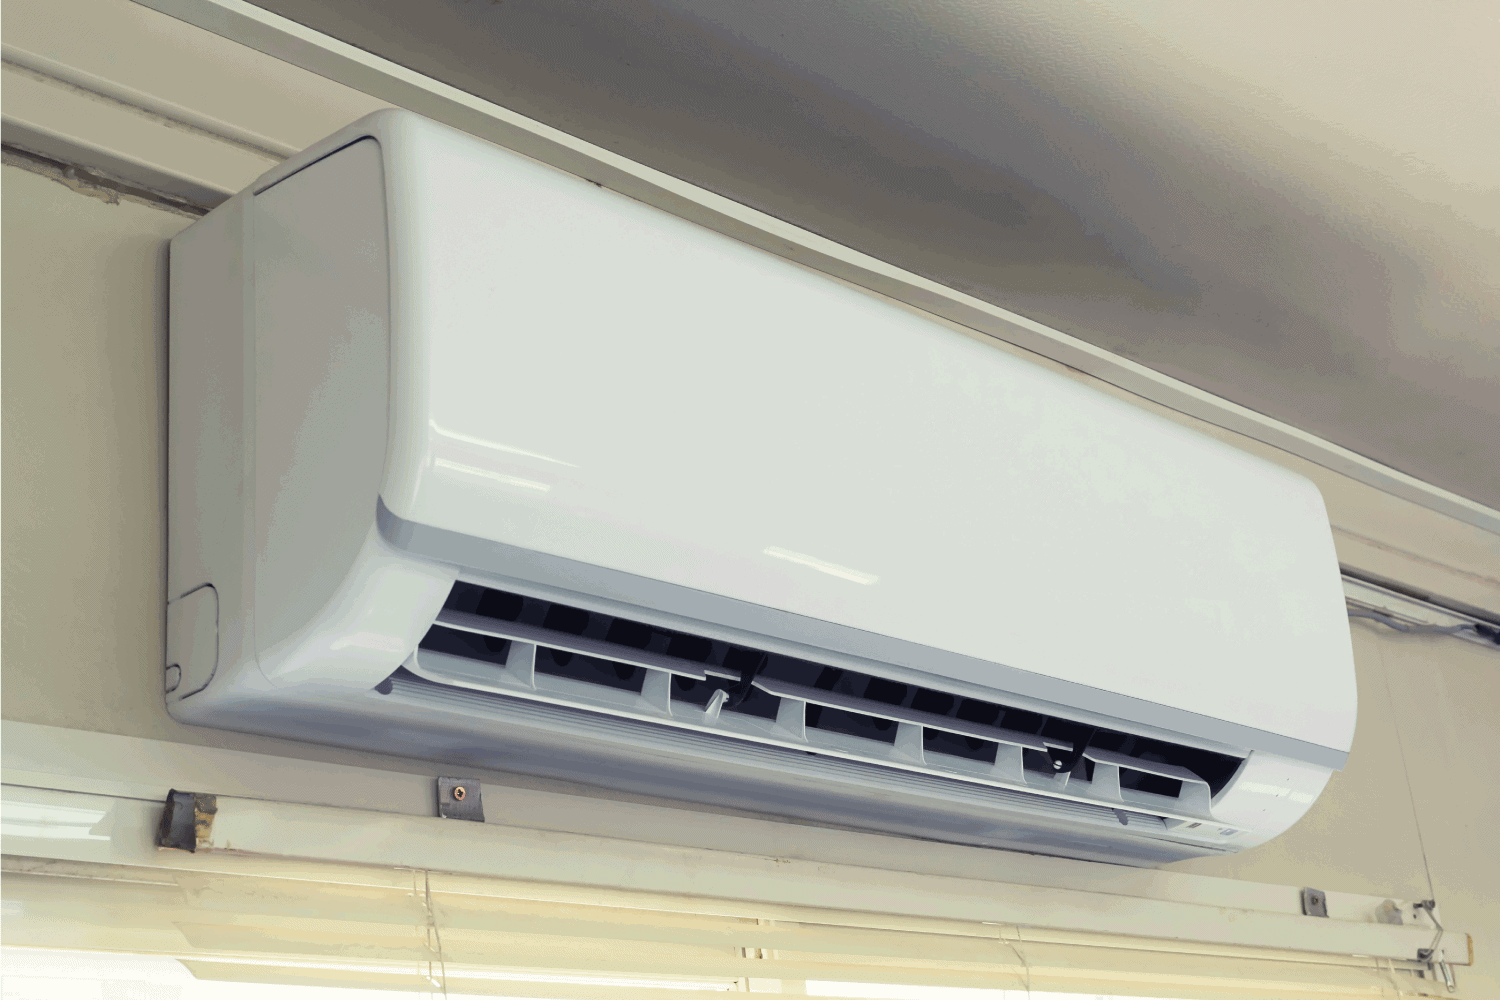 Air conditioner (AC) indoor unit or evaporator and wall-mounted. That is part of mini split system